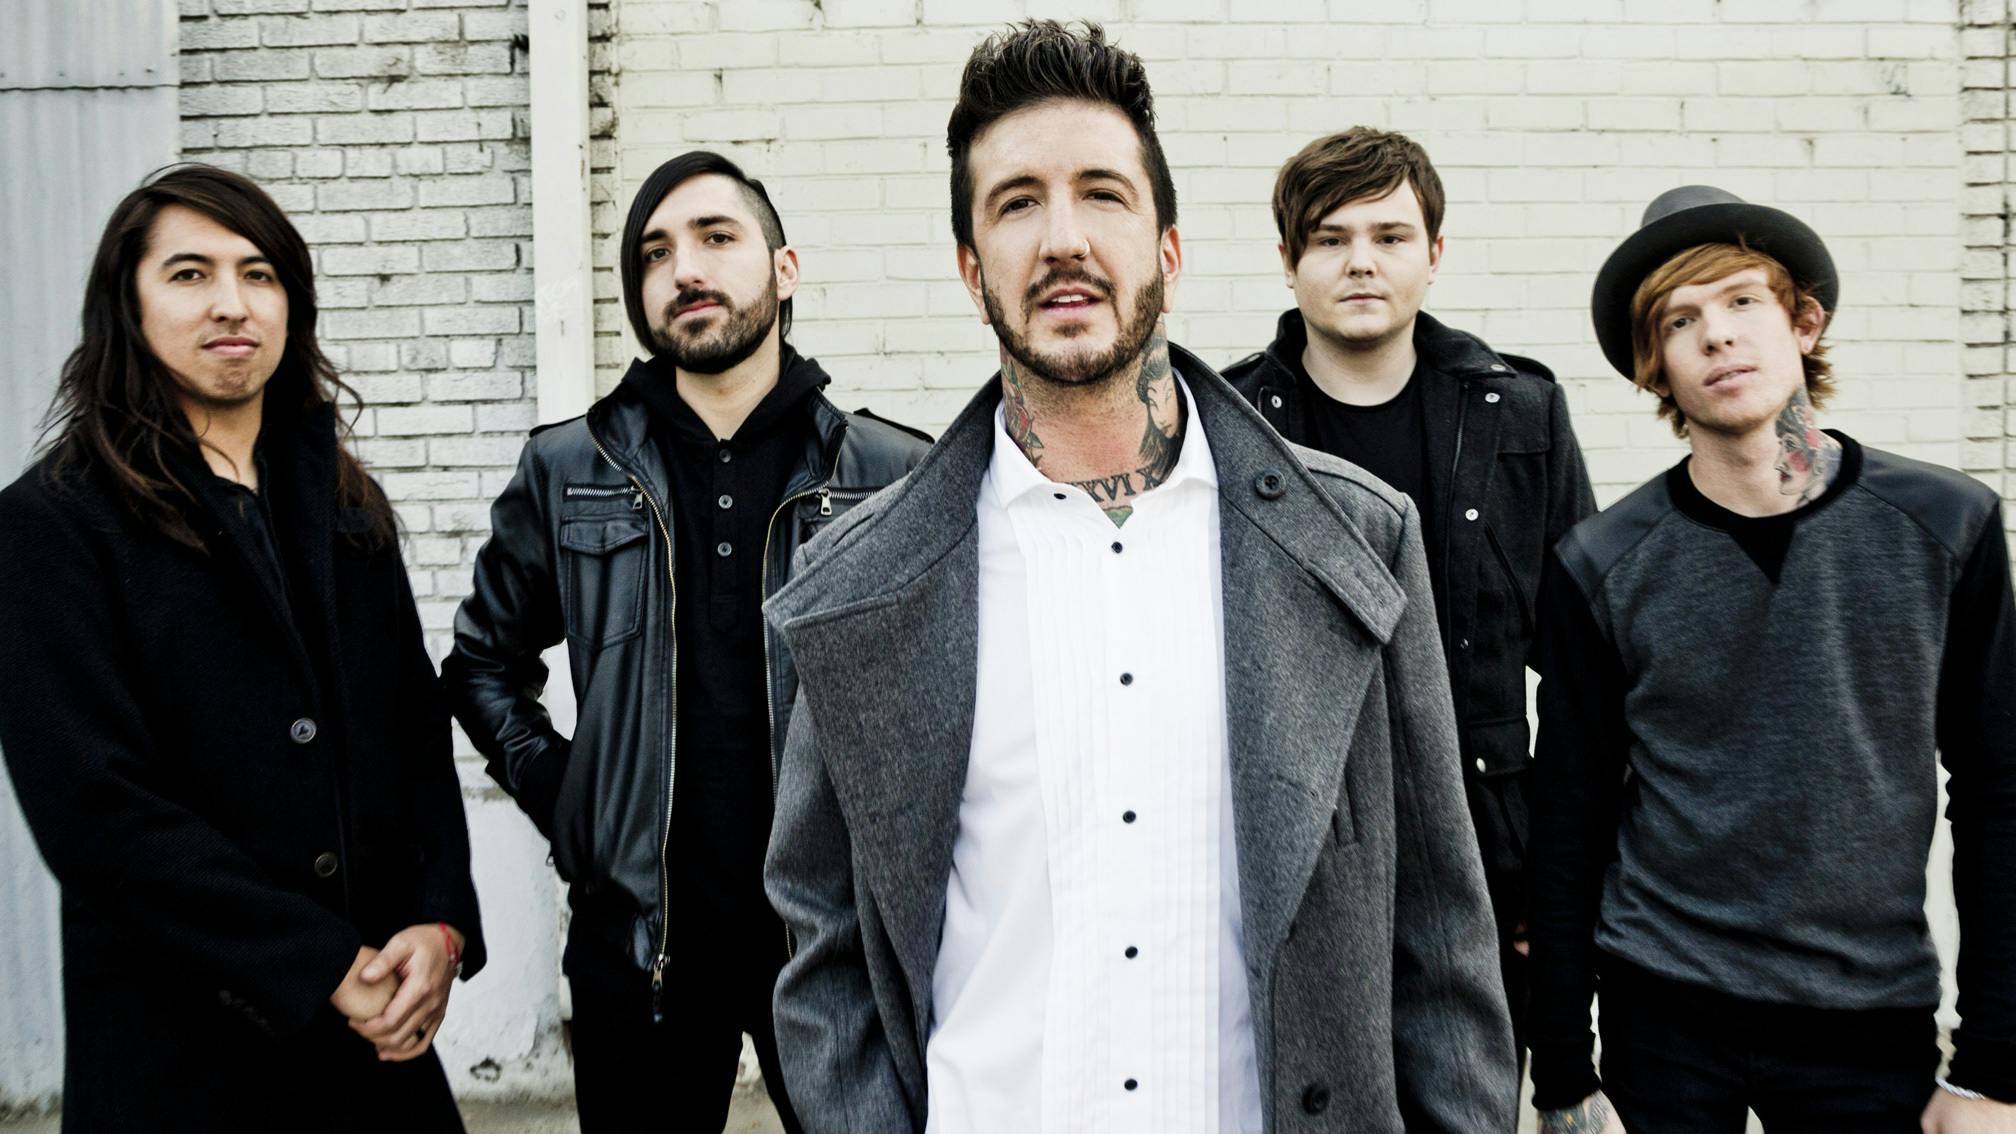 Austin Carlile Opens Up About His Final Album With Of Mice & Men